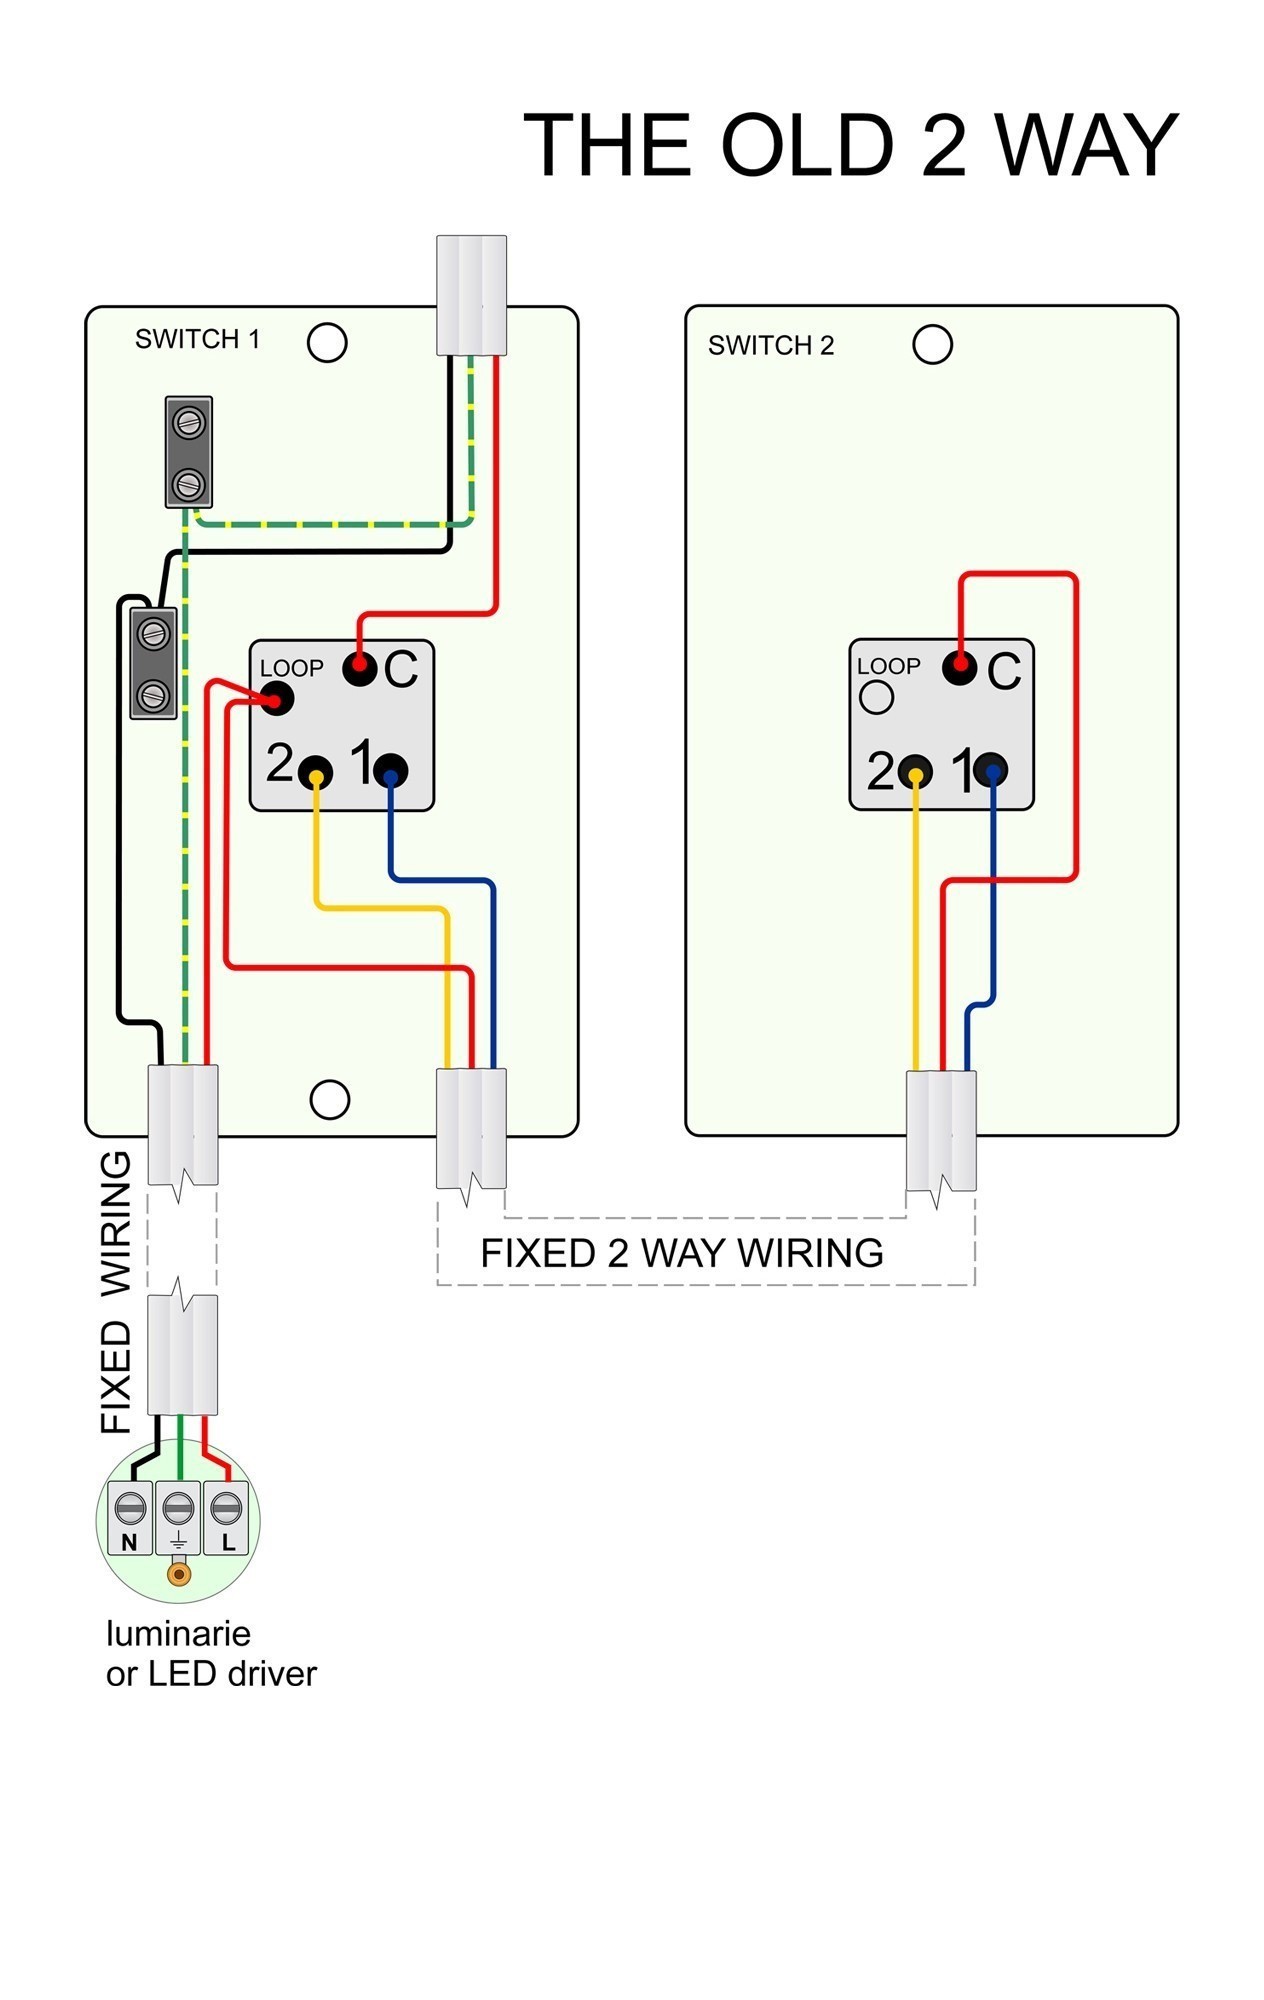 Wiring Diagram for A Two Way Dimmer Switch Best 2 Way Switch Wiring Diagram Awesome Dimmer